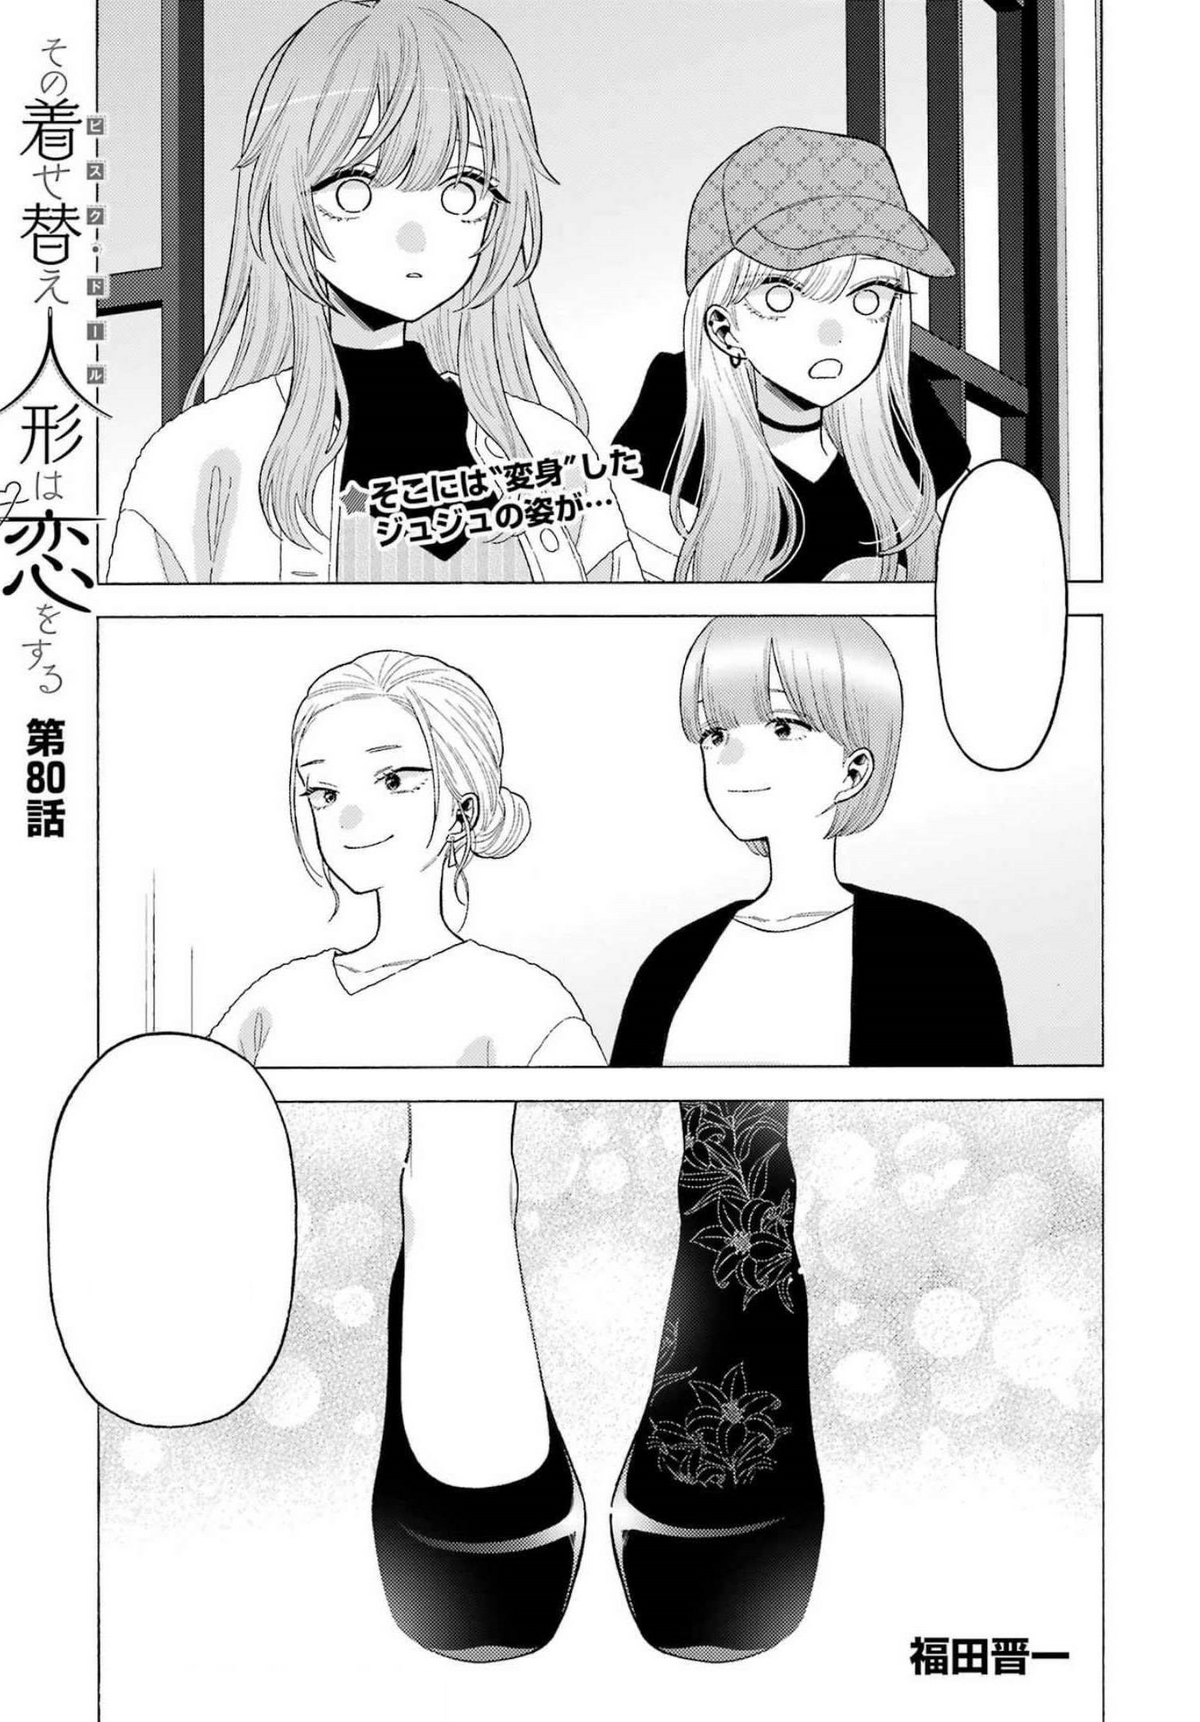 dress up darling chapter 91